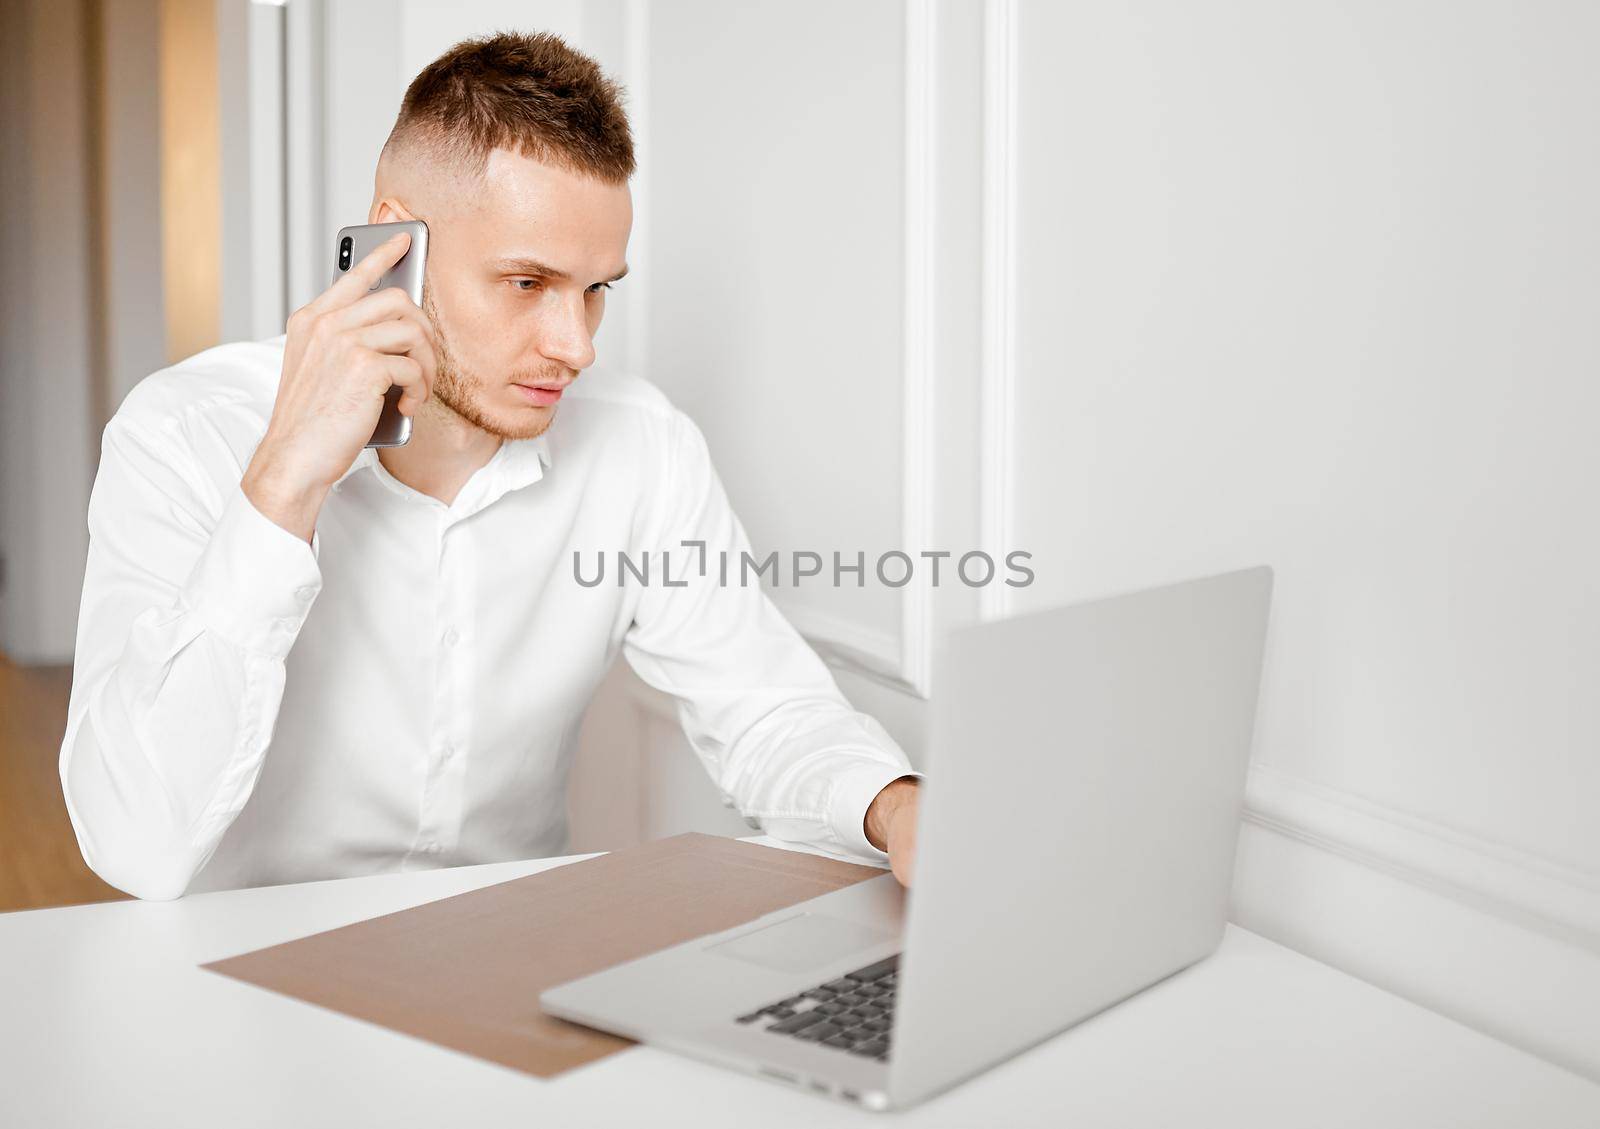 A young man works at home in the kitchen behind a laptop talking on the phone by AntonIlchanka